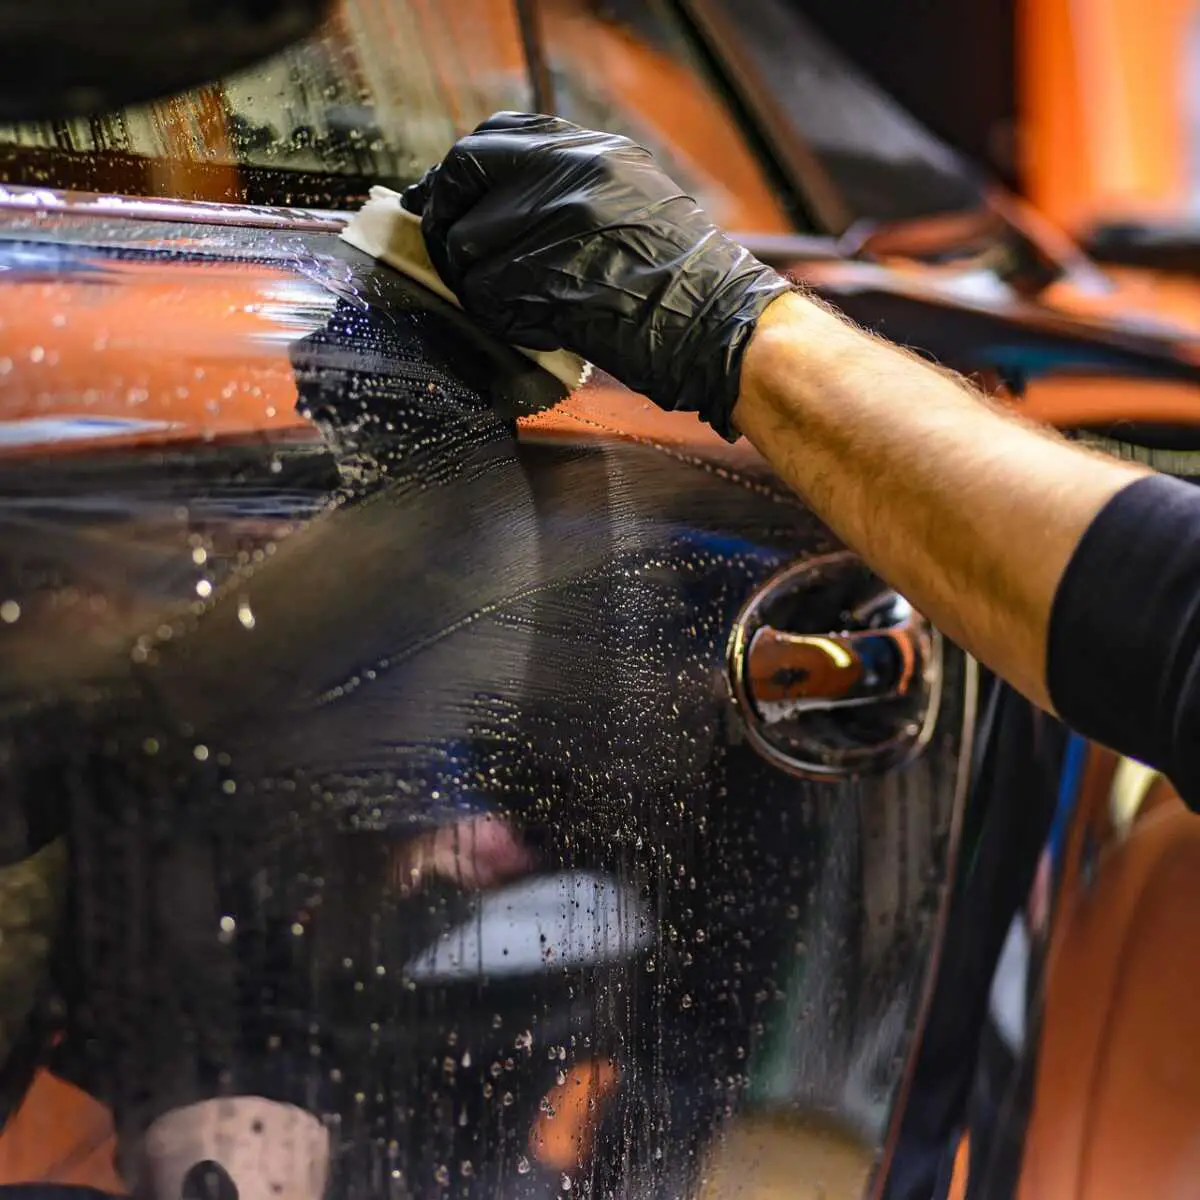 How to clean car windows with tint